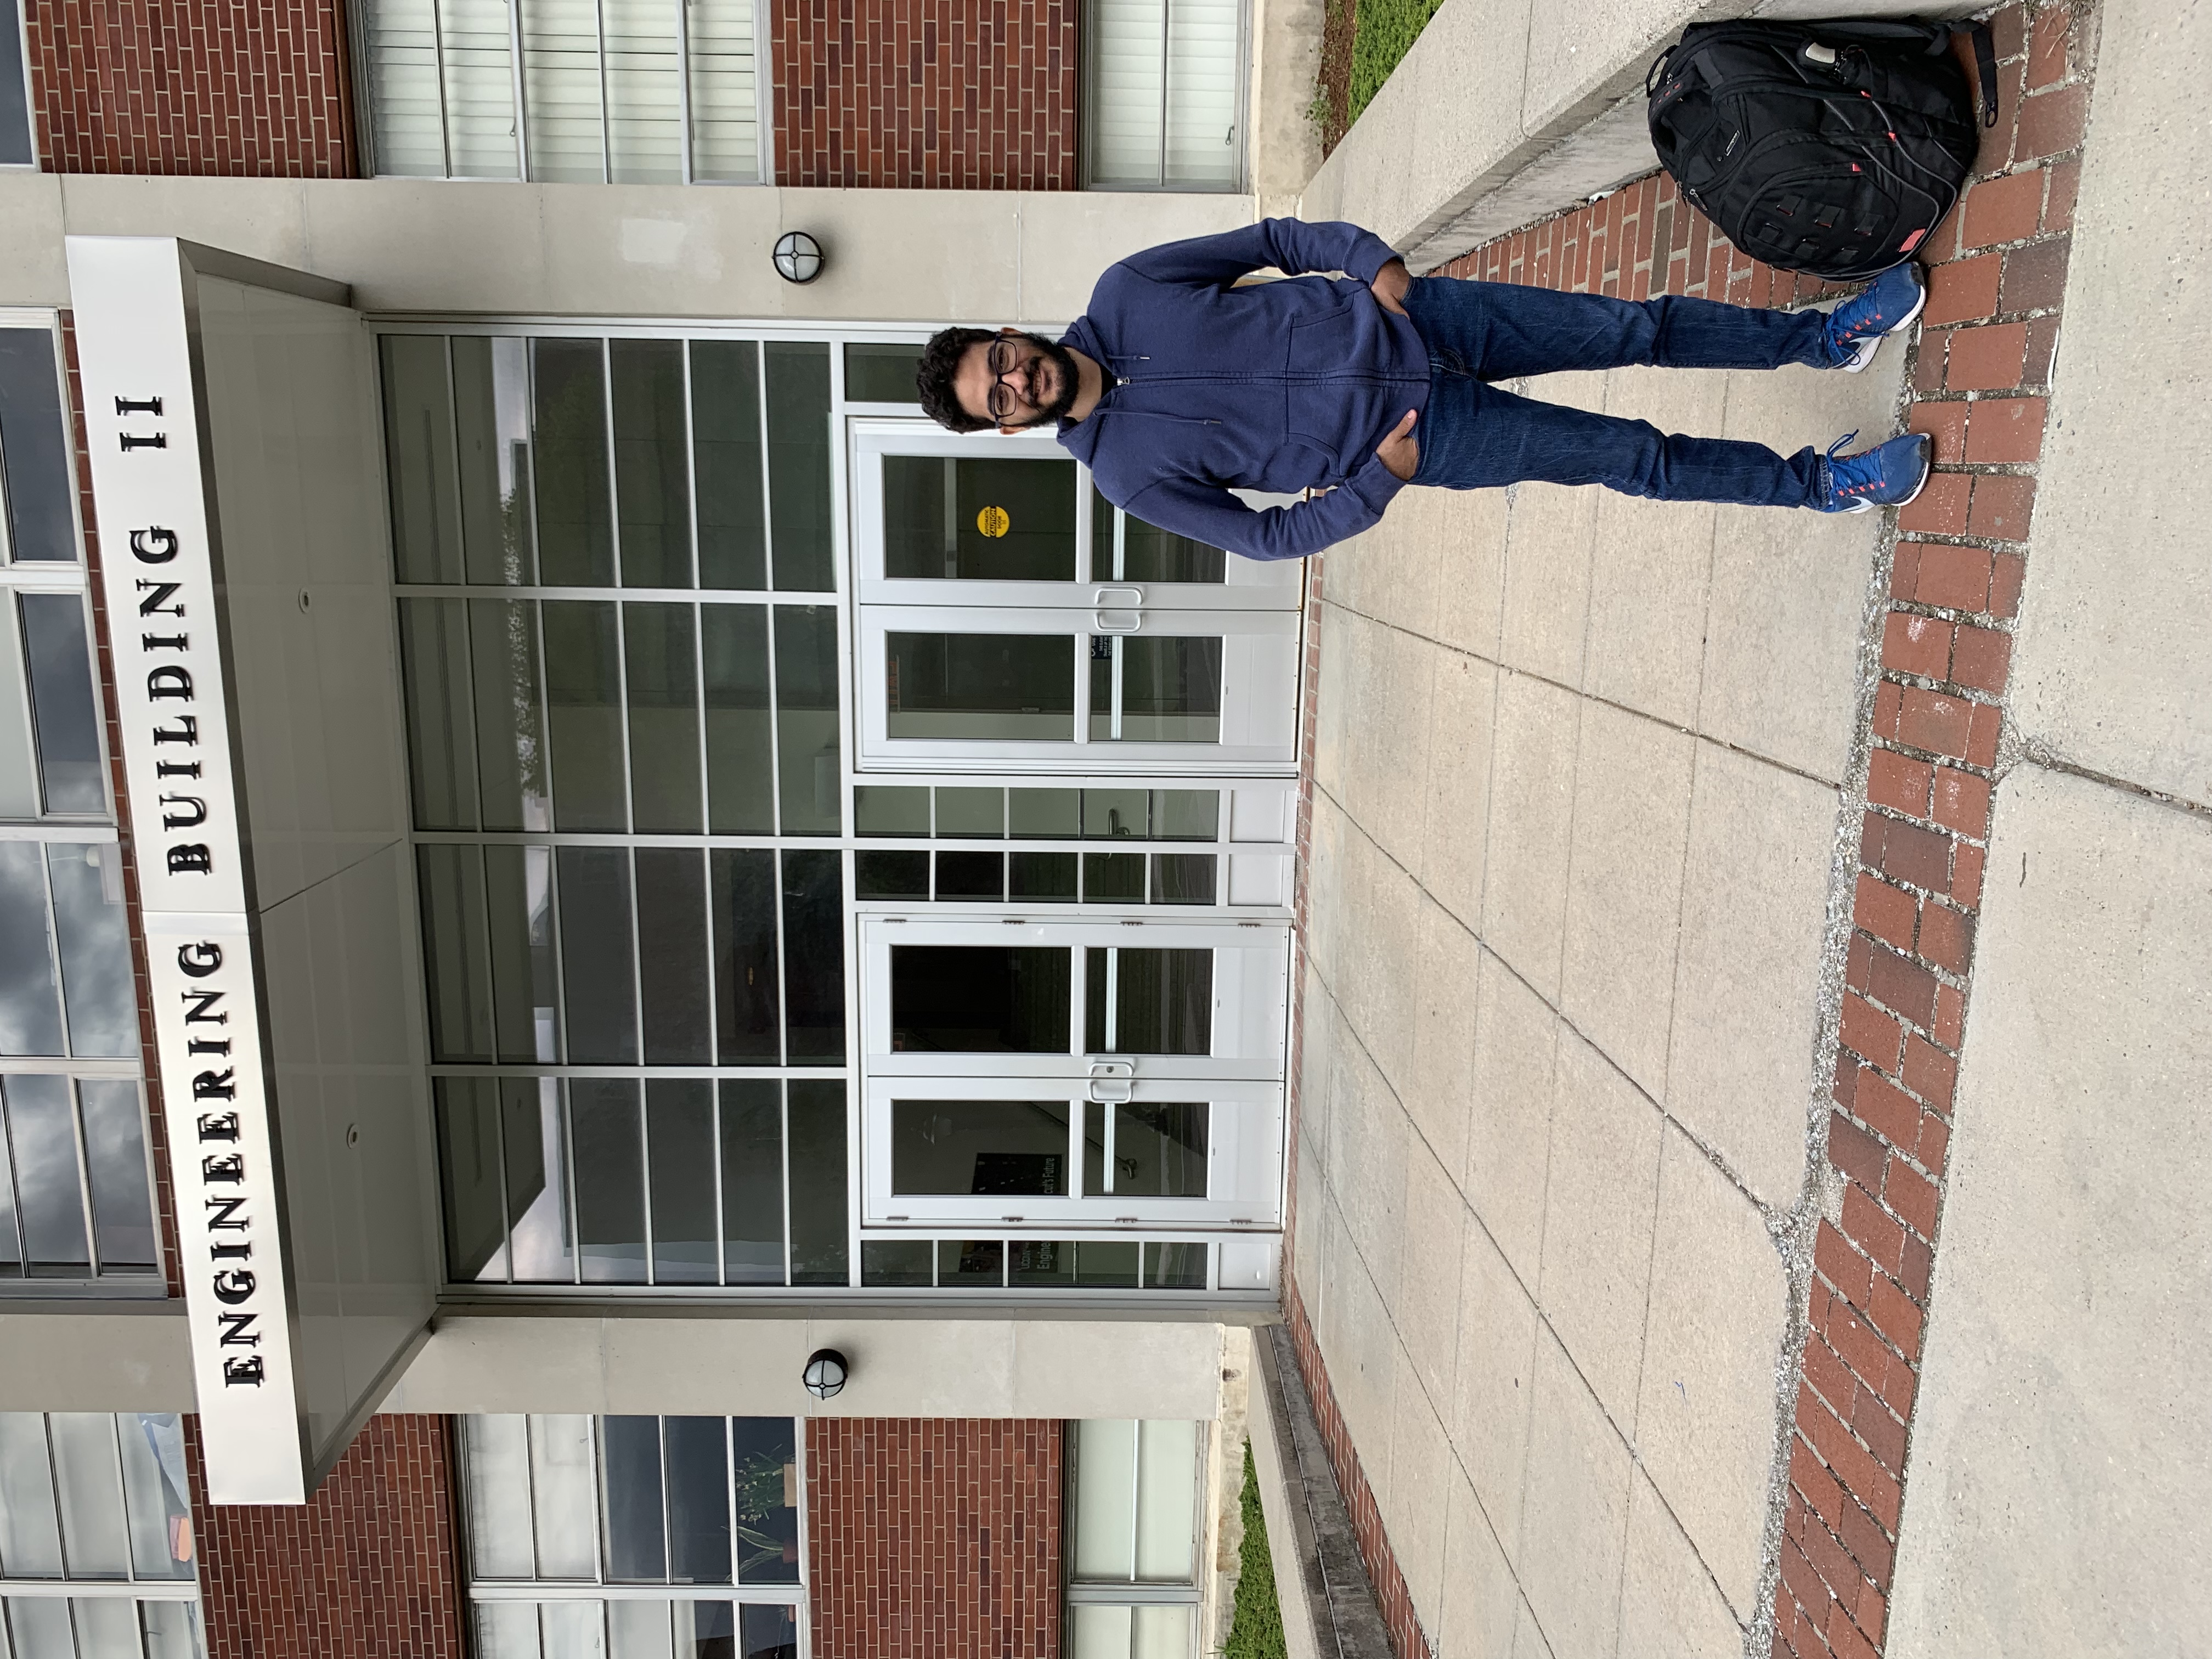 Me in front of a University of Connecticut building, May 2019